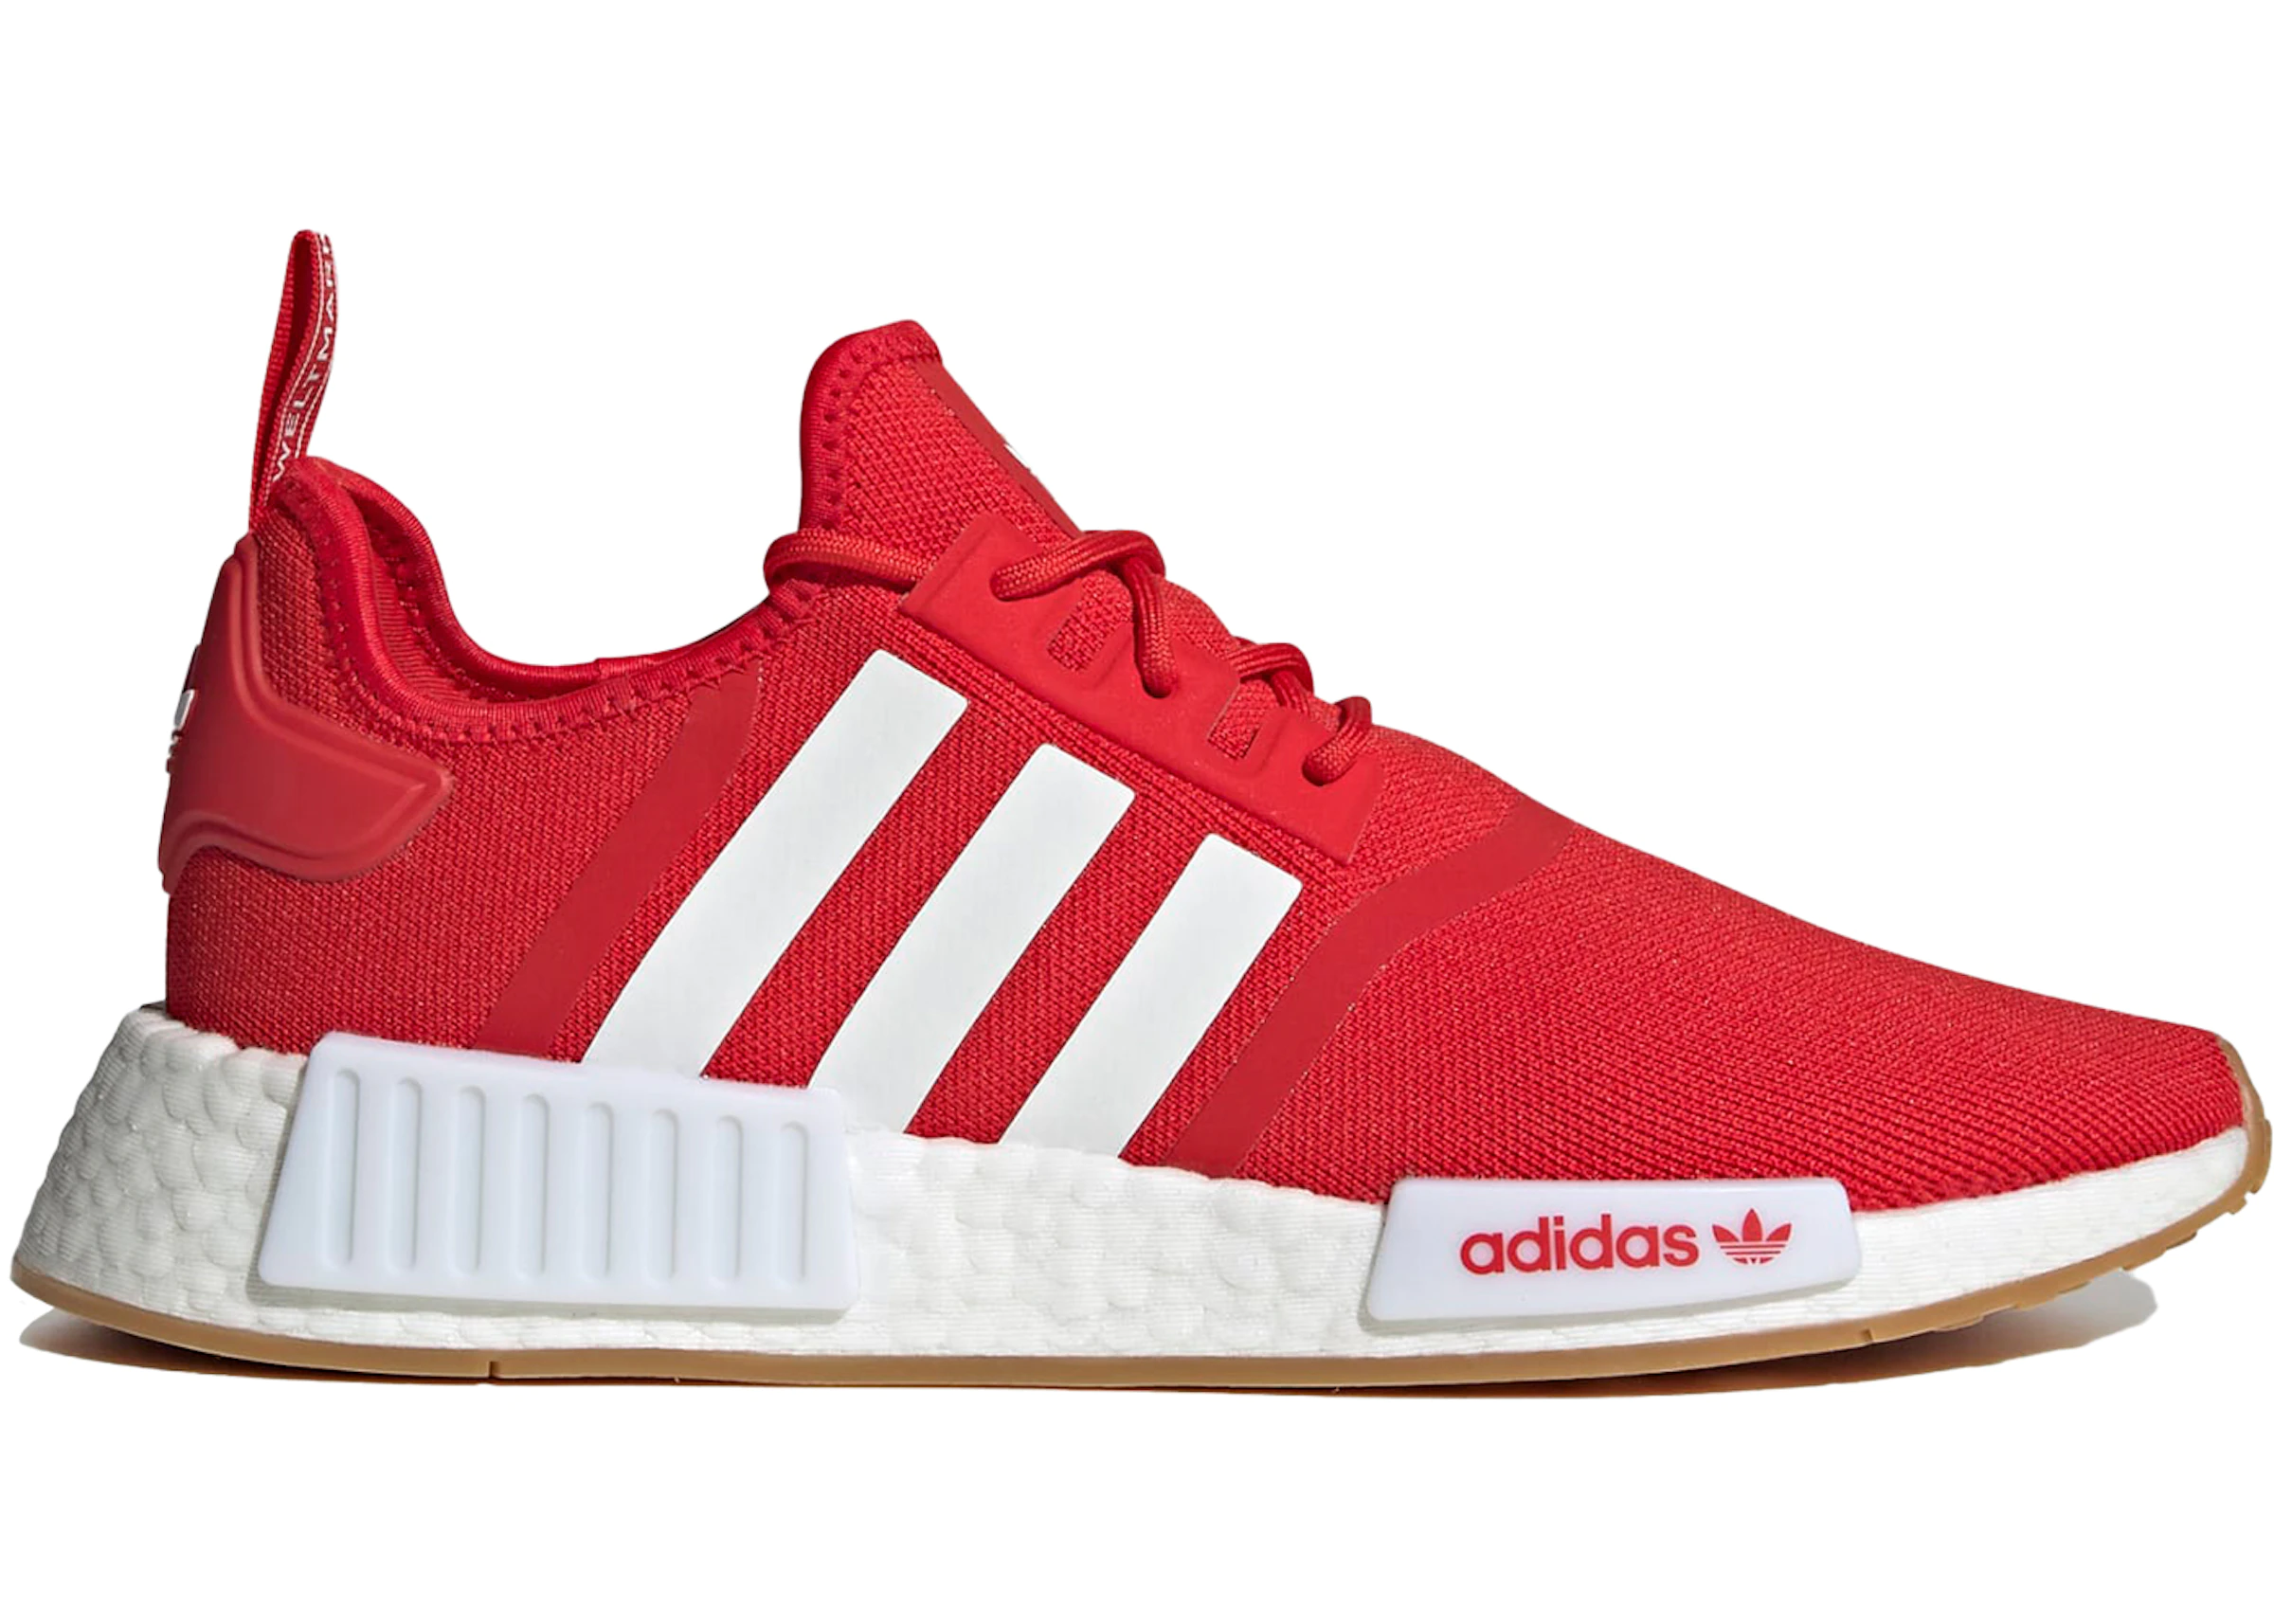 adidas NMD - All Sizes Colorways at StockX